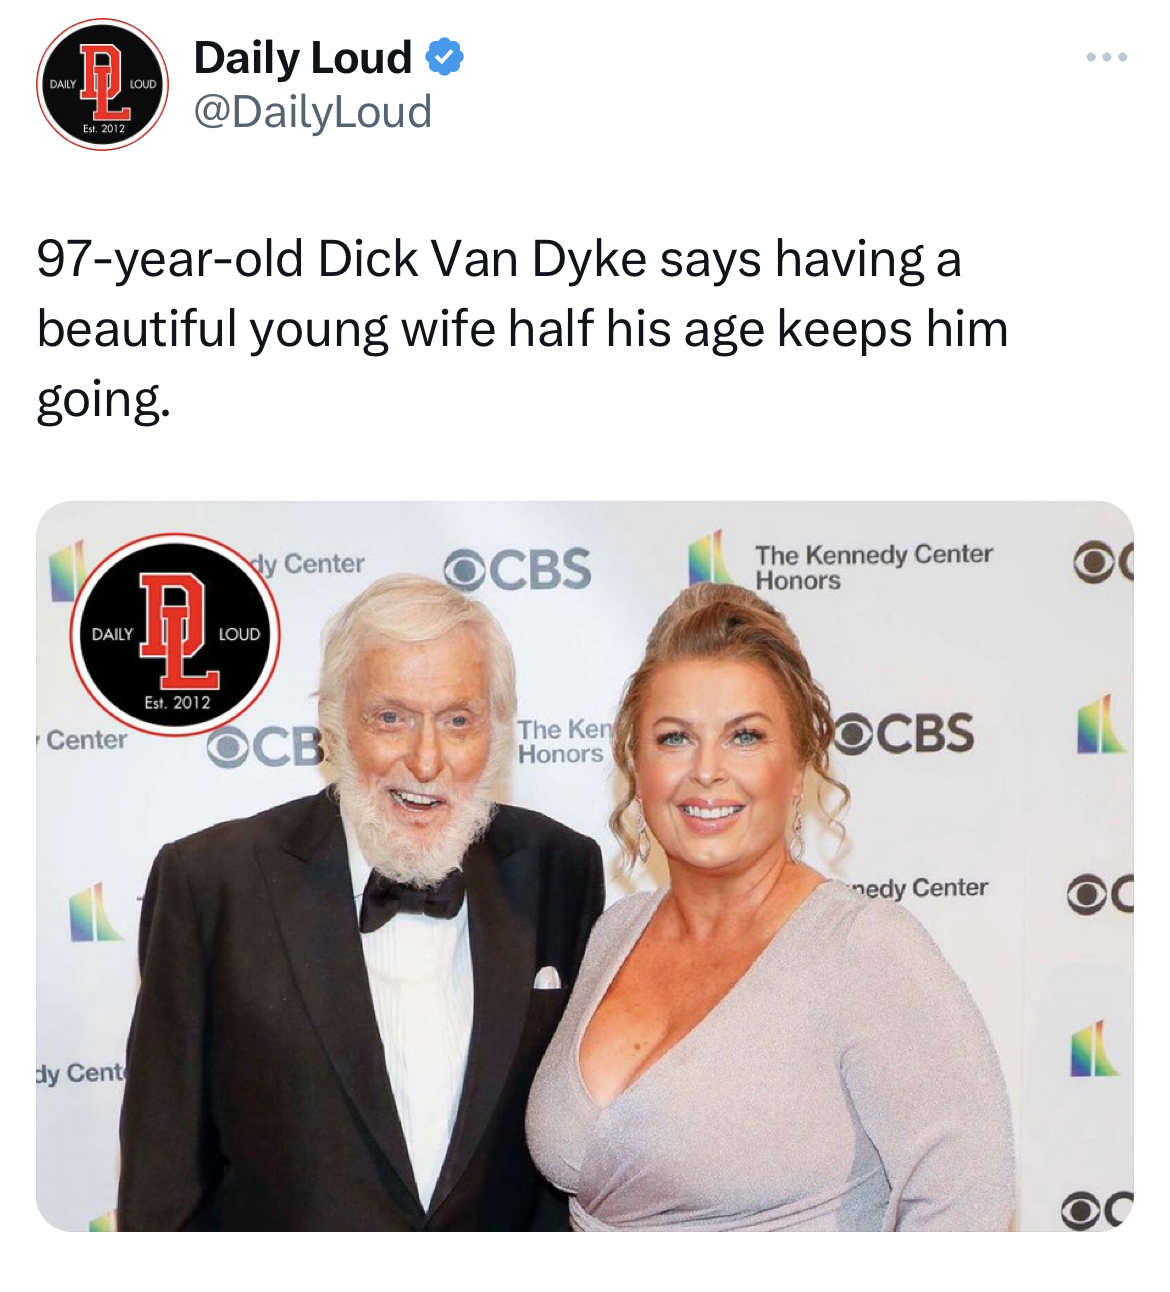 Unhinged Tweets - dick van dyke - 97yearold Dick Van Dyke says having a beautiful young wife half his age keeps him going. Daily Center 1 Daily Loud dy Cent Evr. 2012 y Center Loud Ocb Ocbs The Ken Honors The Kennedy Center Honors Ocbs nedy Center Oc Oc